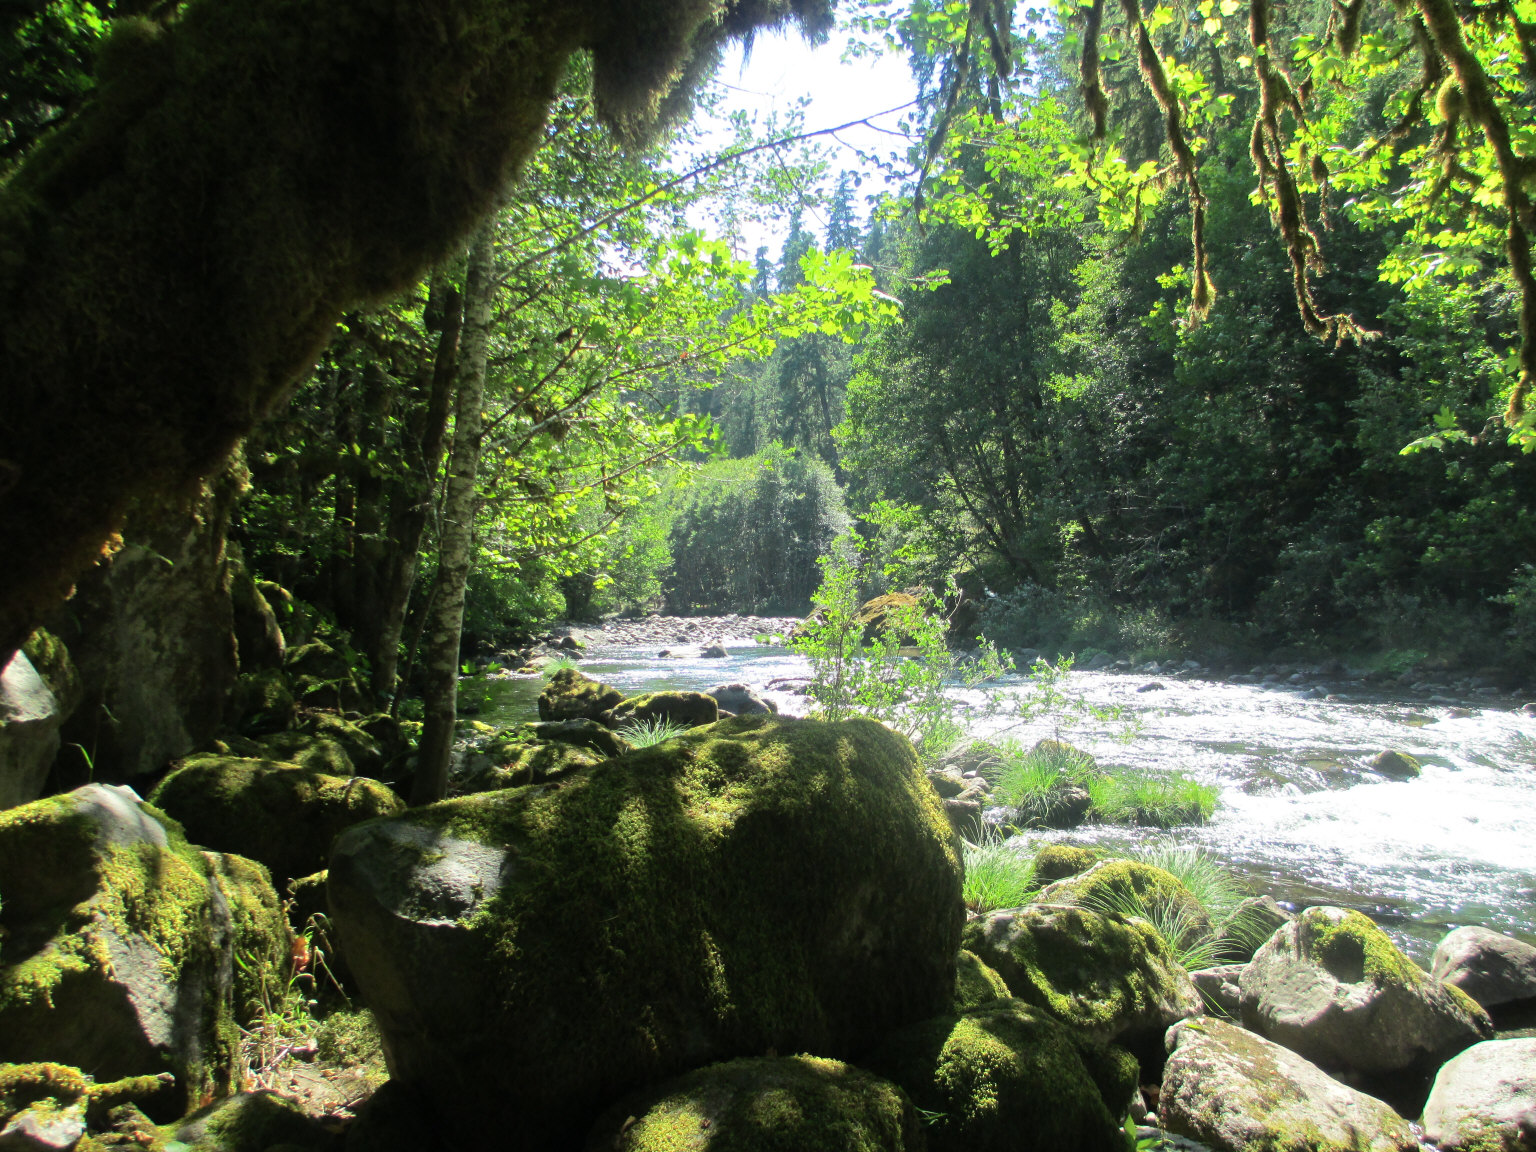 lush green trees stand next to a river surrounded by rocks